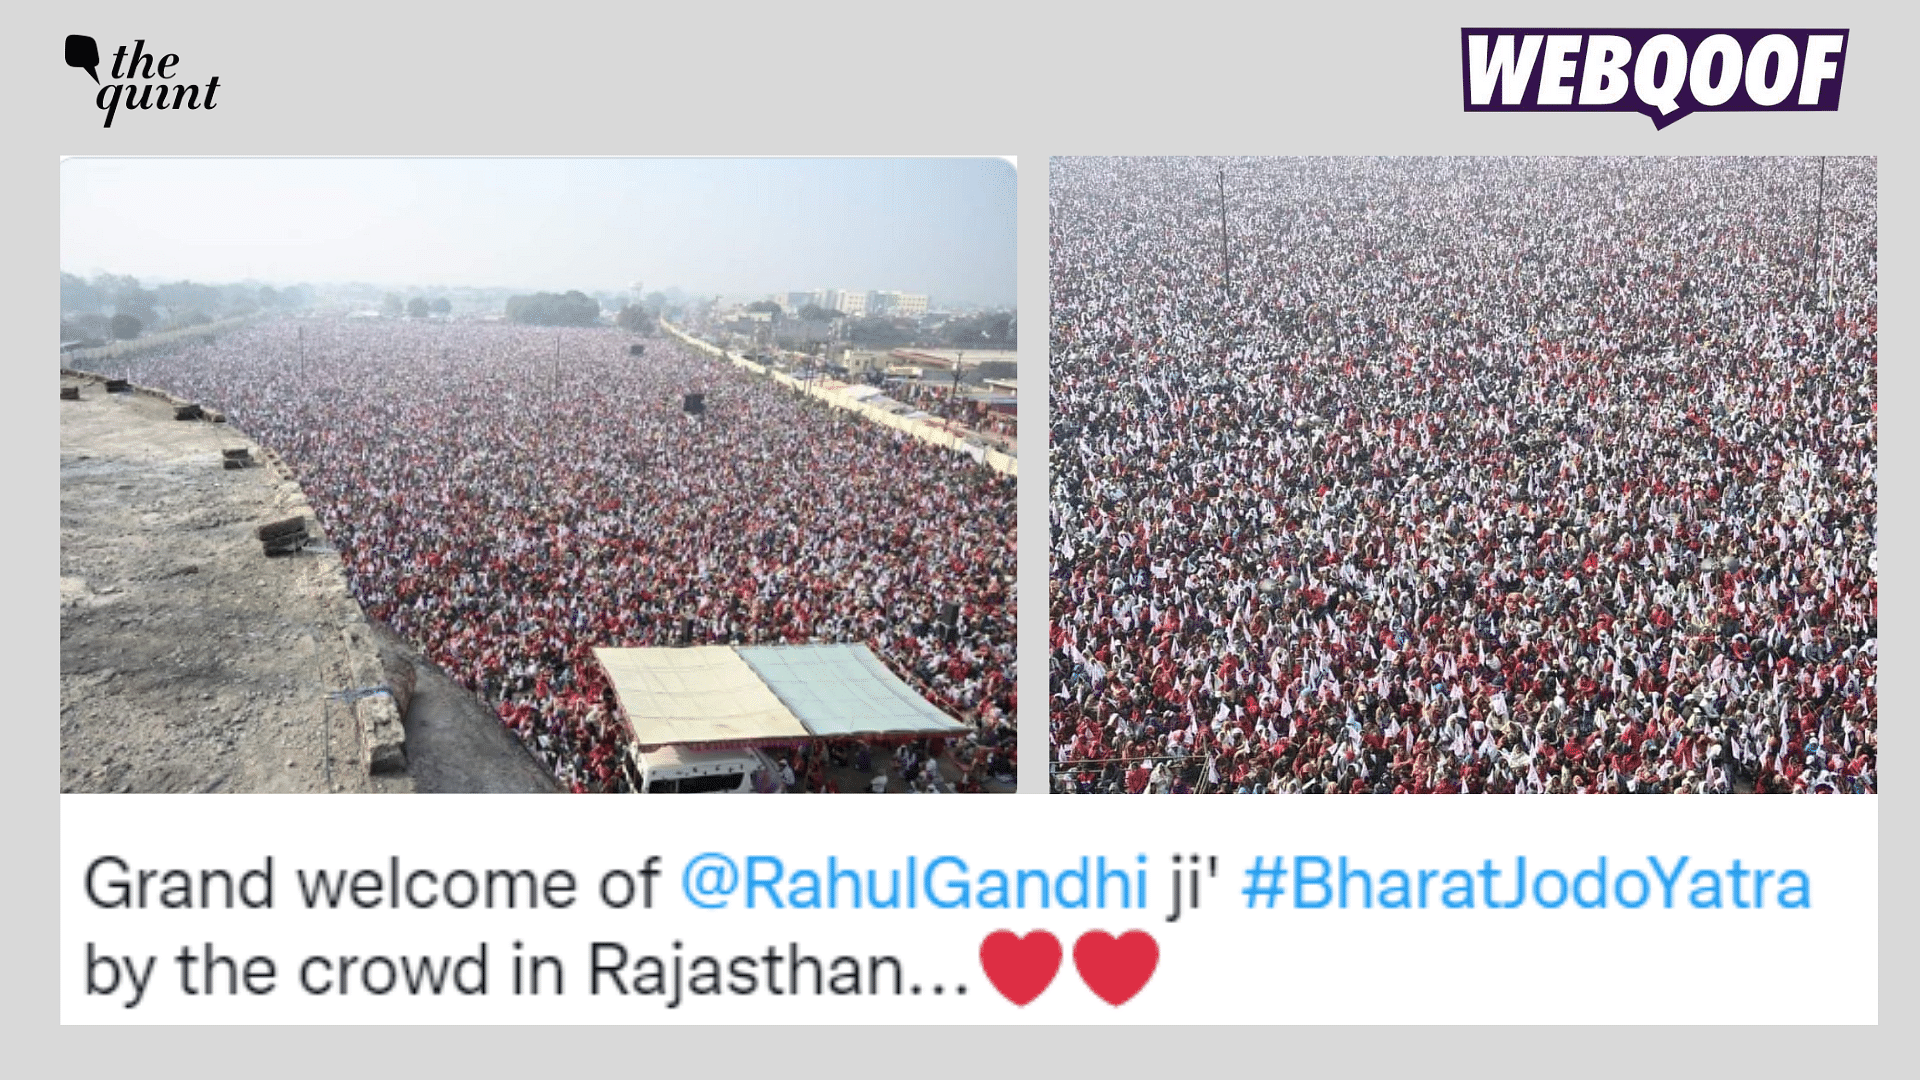 <div class="paragraphs"><p>Fact-check -&nbsp;Unrelated images from Mathura shared as 'Crowd at Bharat Jodo Yatra in Rajasthan'.</p></div>